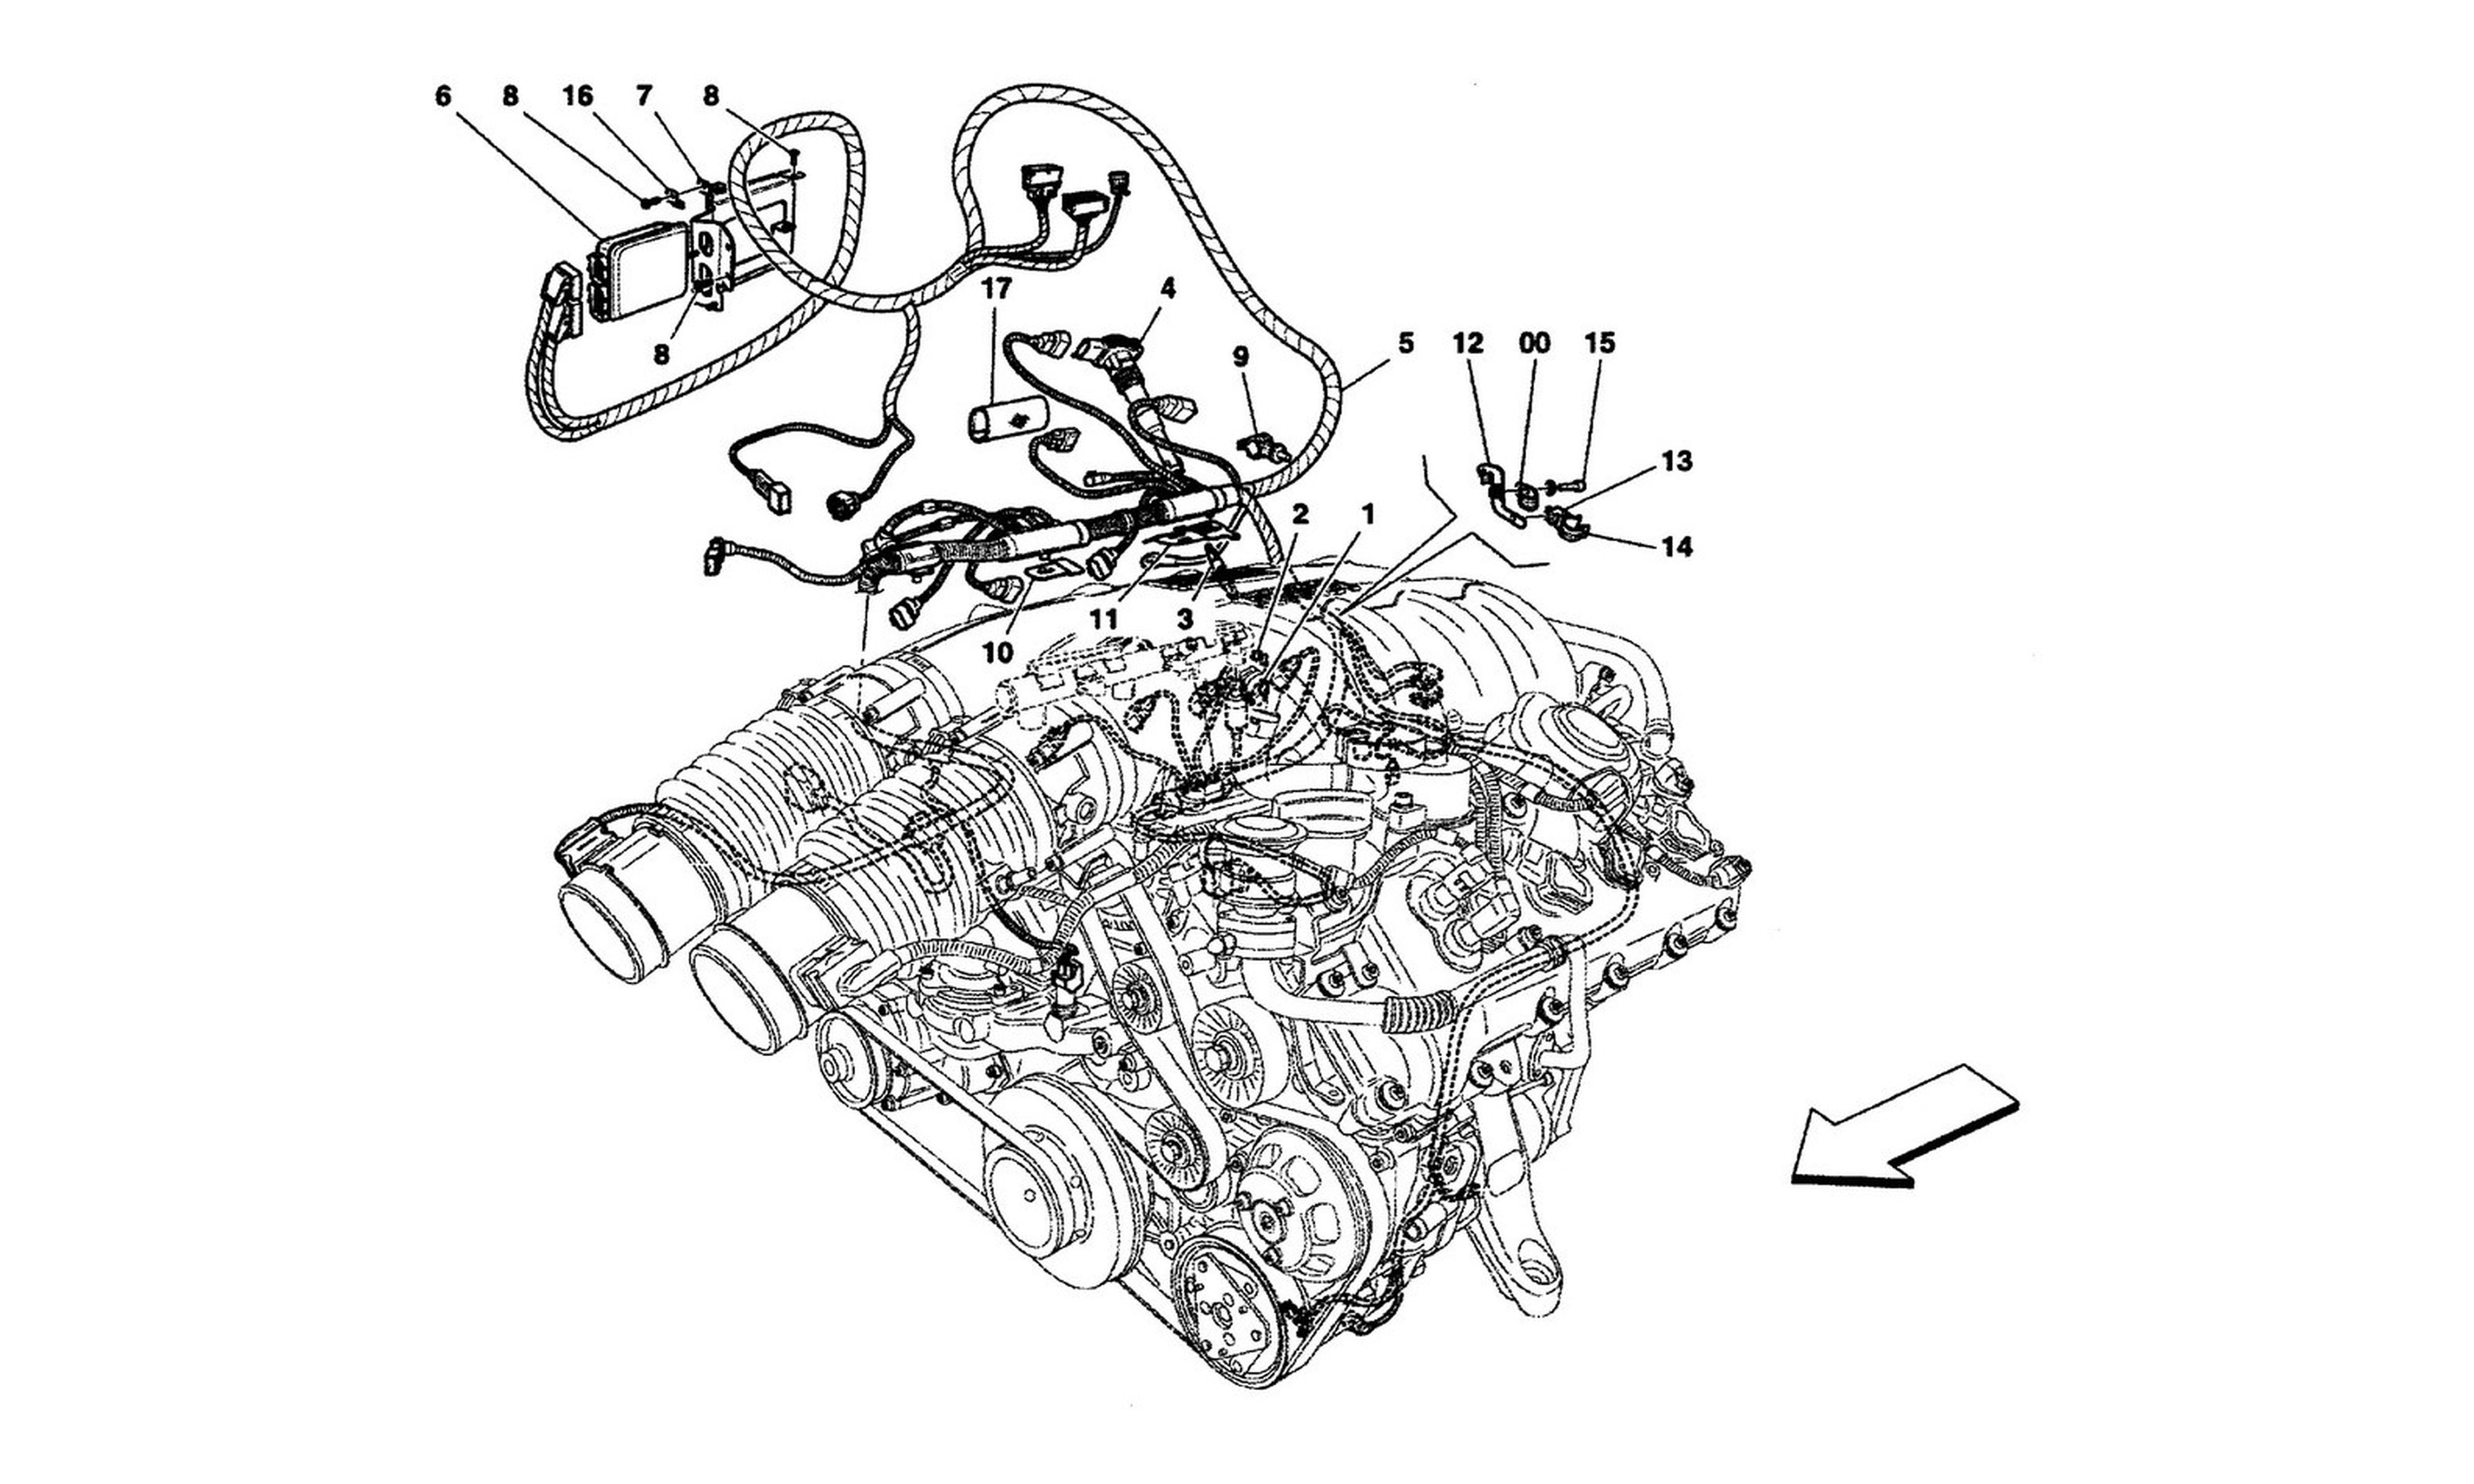 Schematic: Right Injection Device - Ignition